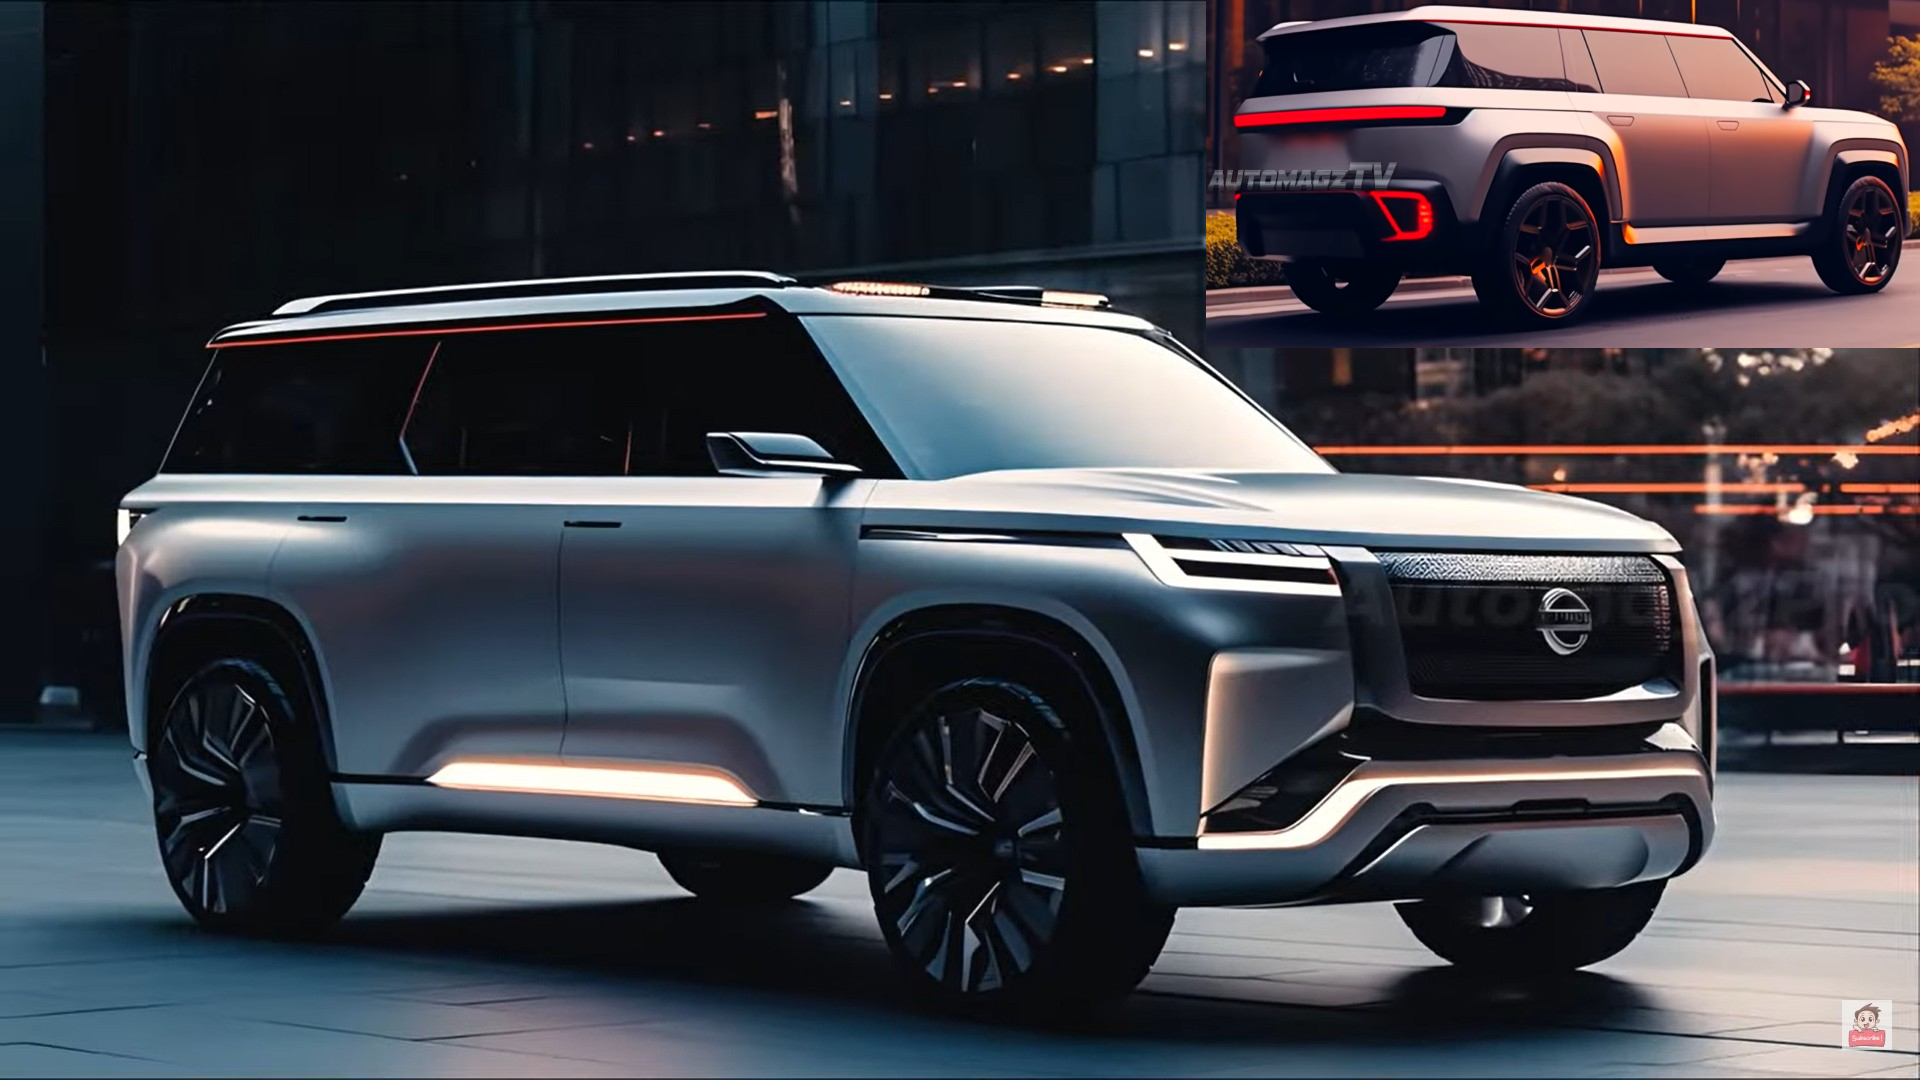 https://s1.cdn.autoevolution.com/images/news/all-new-2025-nissan-armada-y63-gets-unofficially-previewed-before-the-oem-unveil-223984_1.jpg